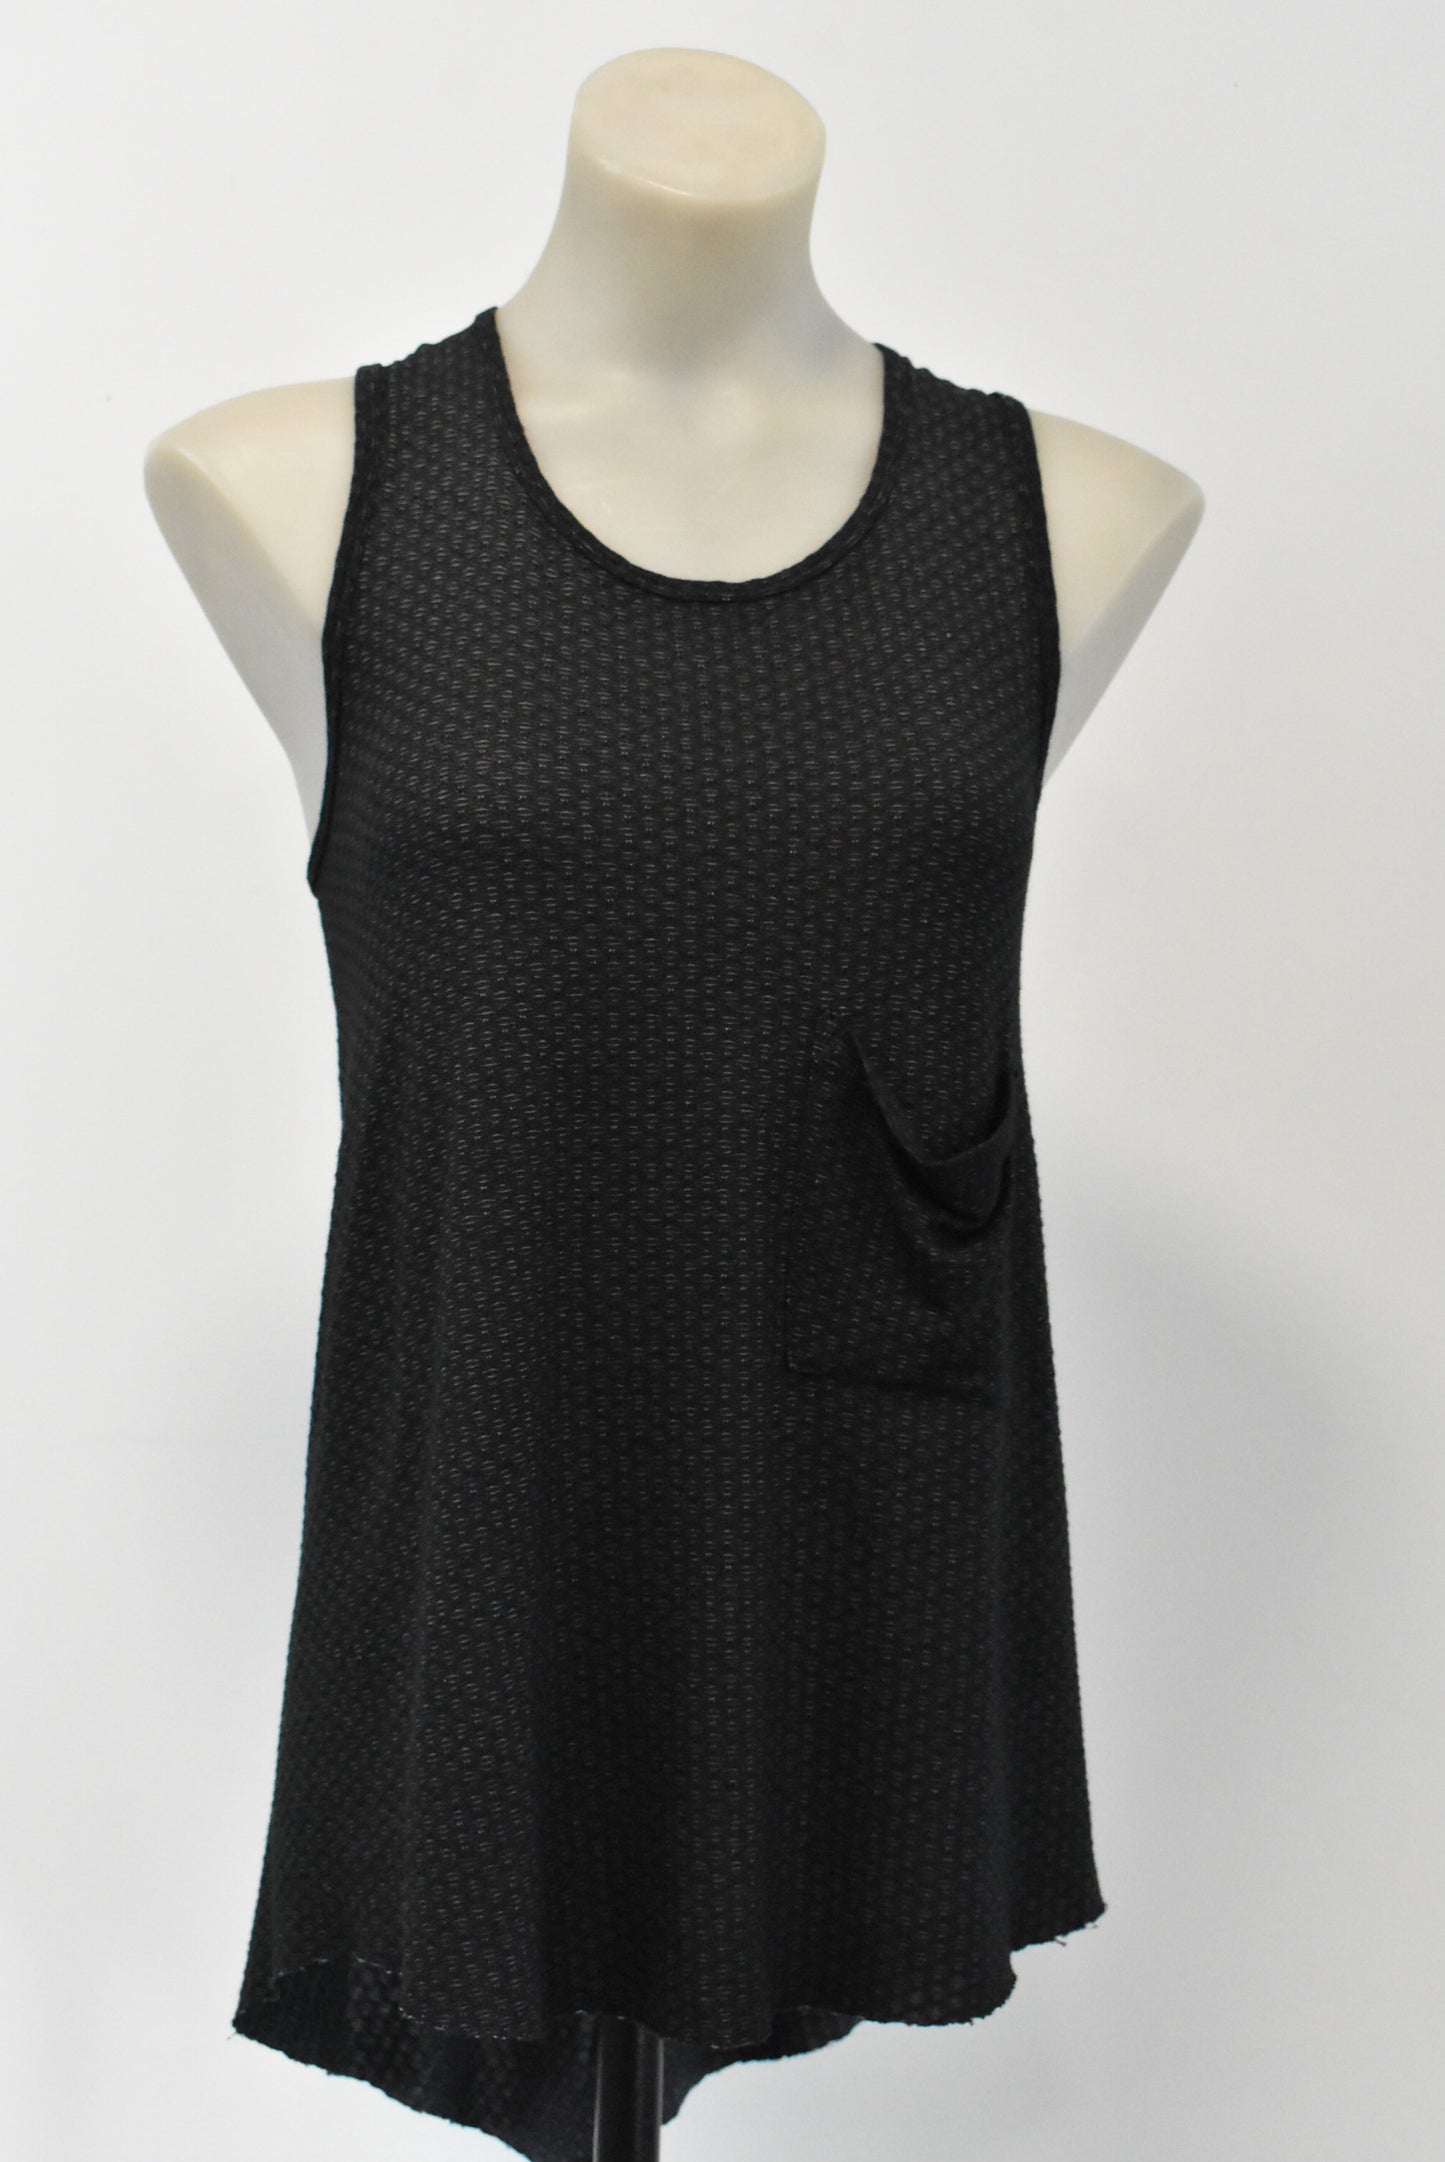 Nom*D Singlet with cutaway back, S